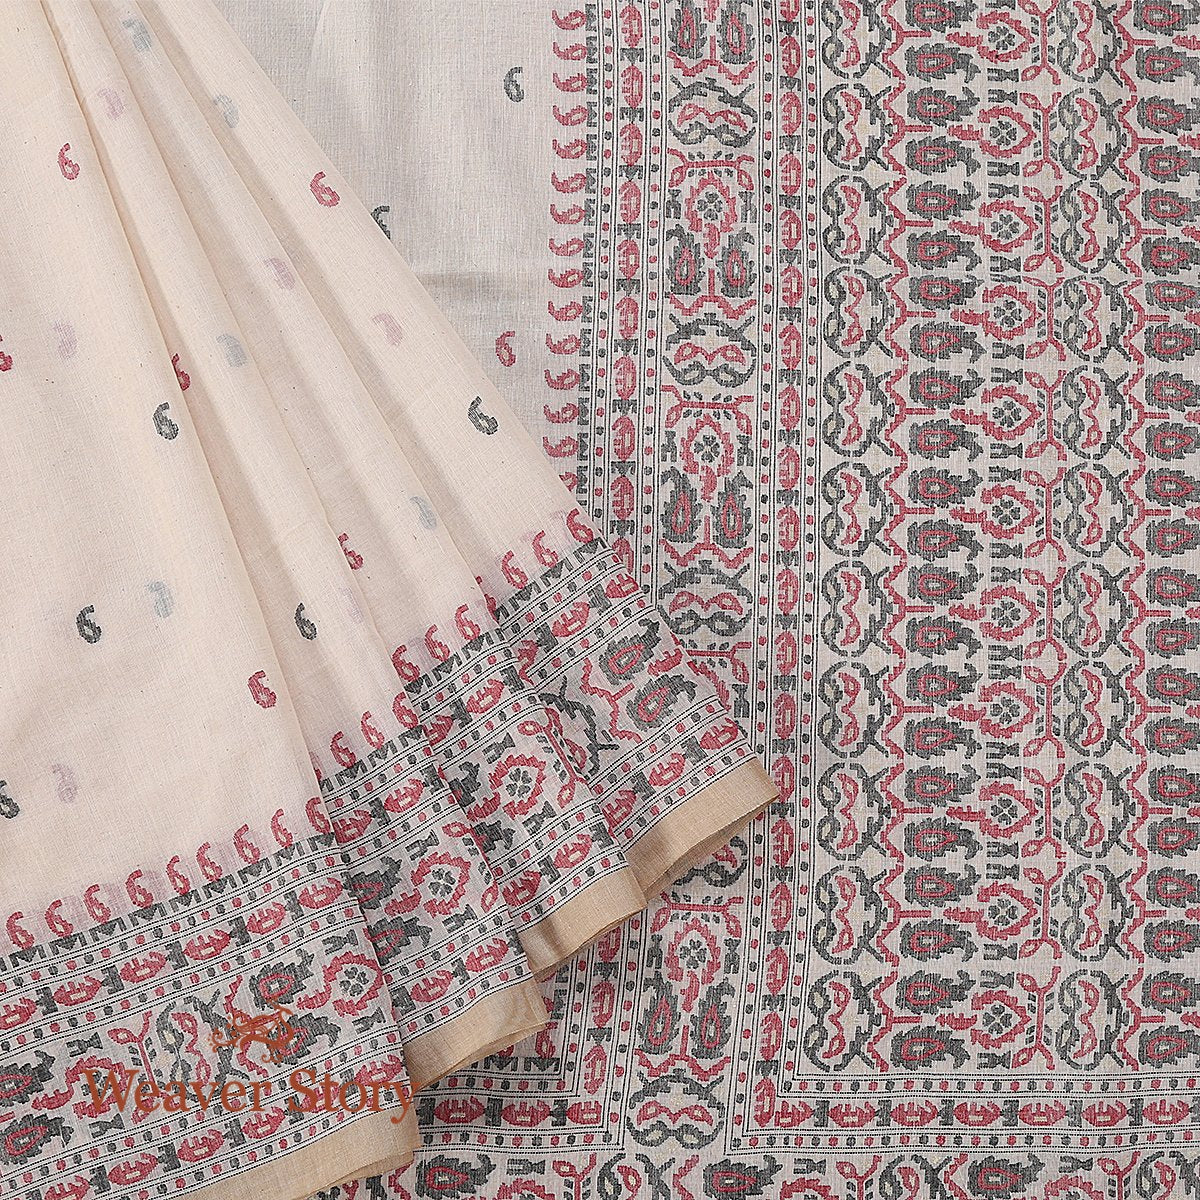 Beige_Hand_Spun_and_Hand_Woven_Cotton_Jamdani_Saree_with_Red_and_Black_Thread_Weave_WeaverStory_01